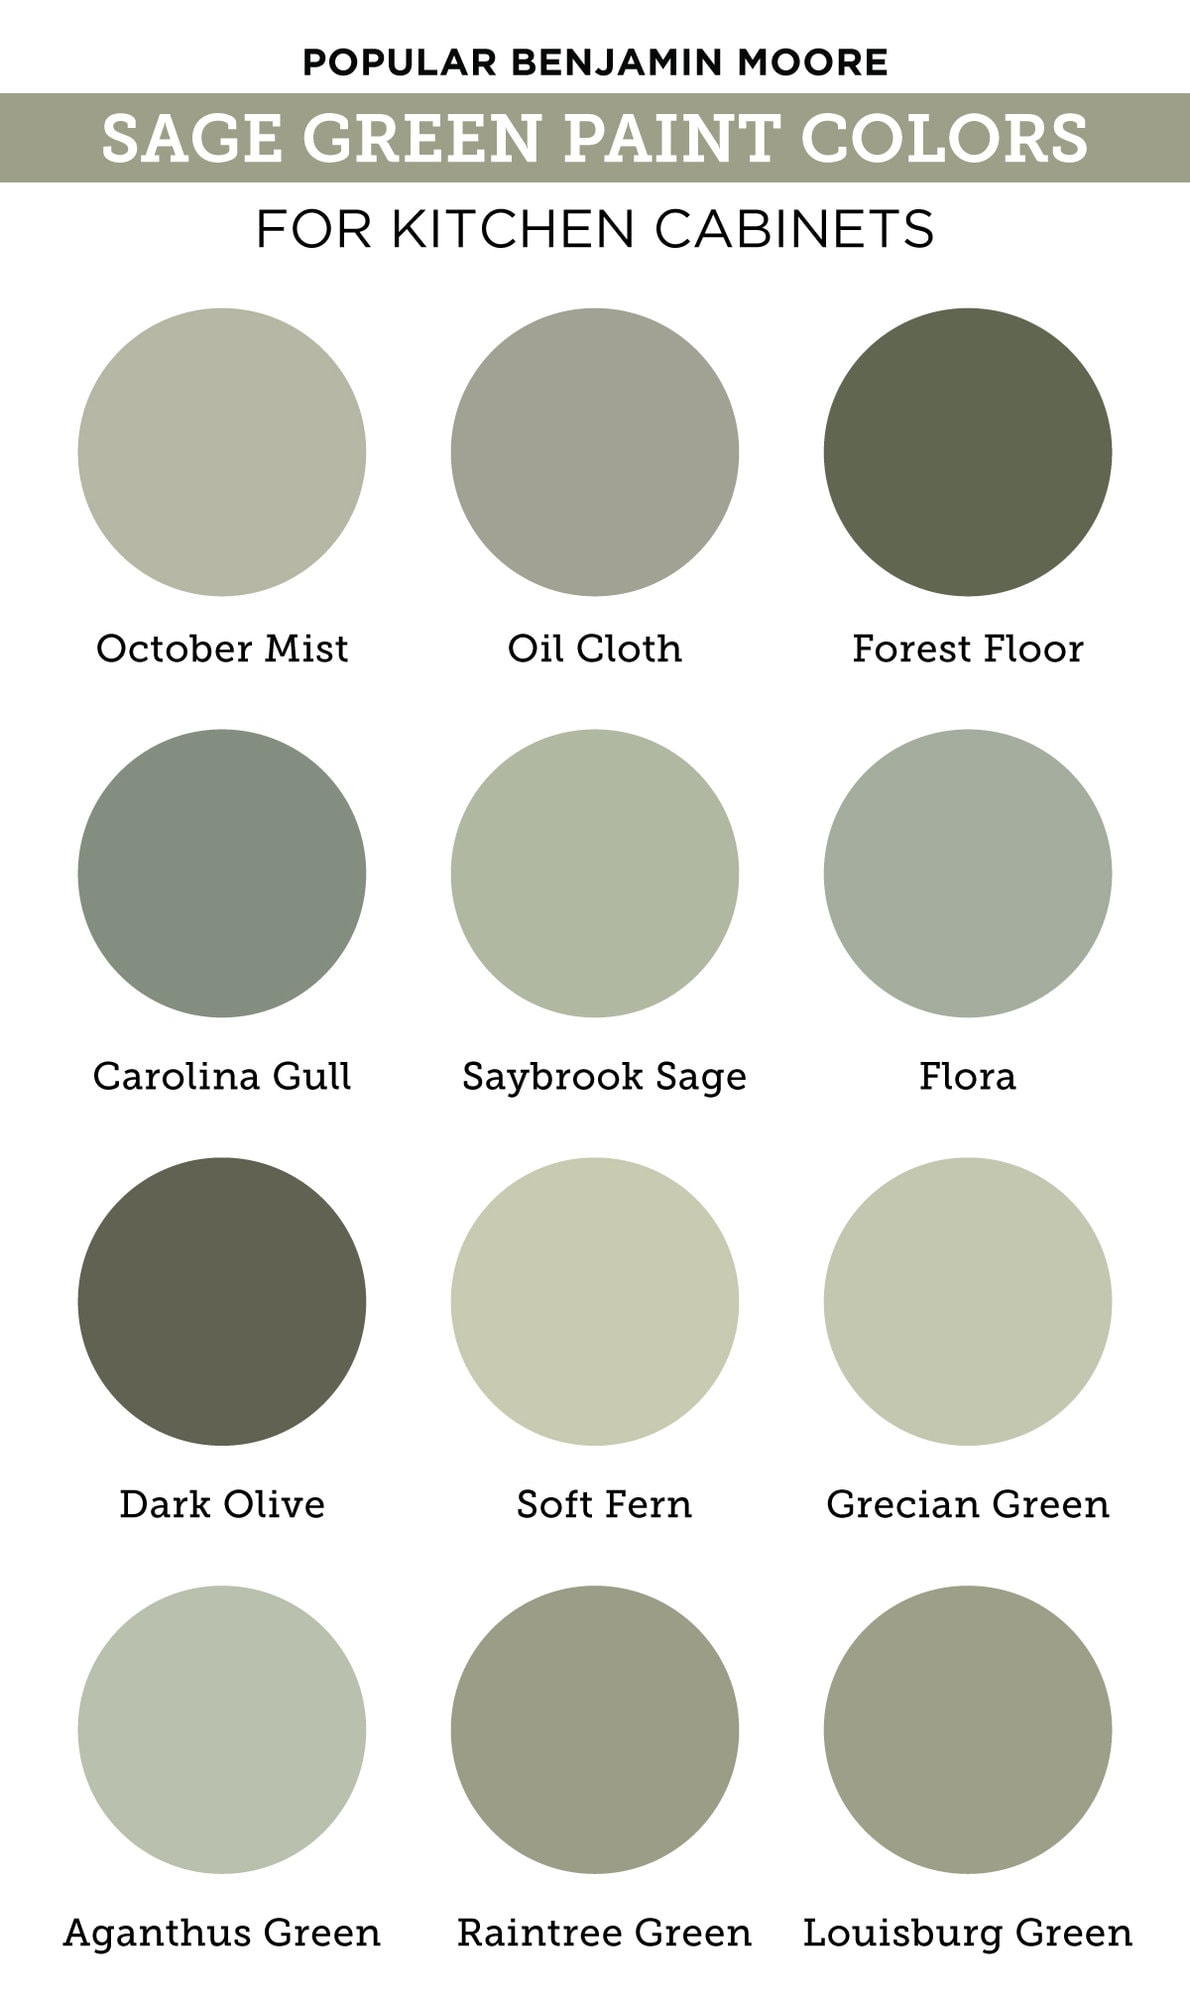 most popular benjamin moore sage green paint colors for kitchen cabinets